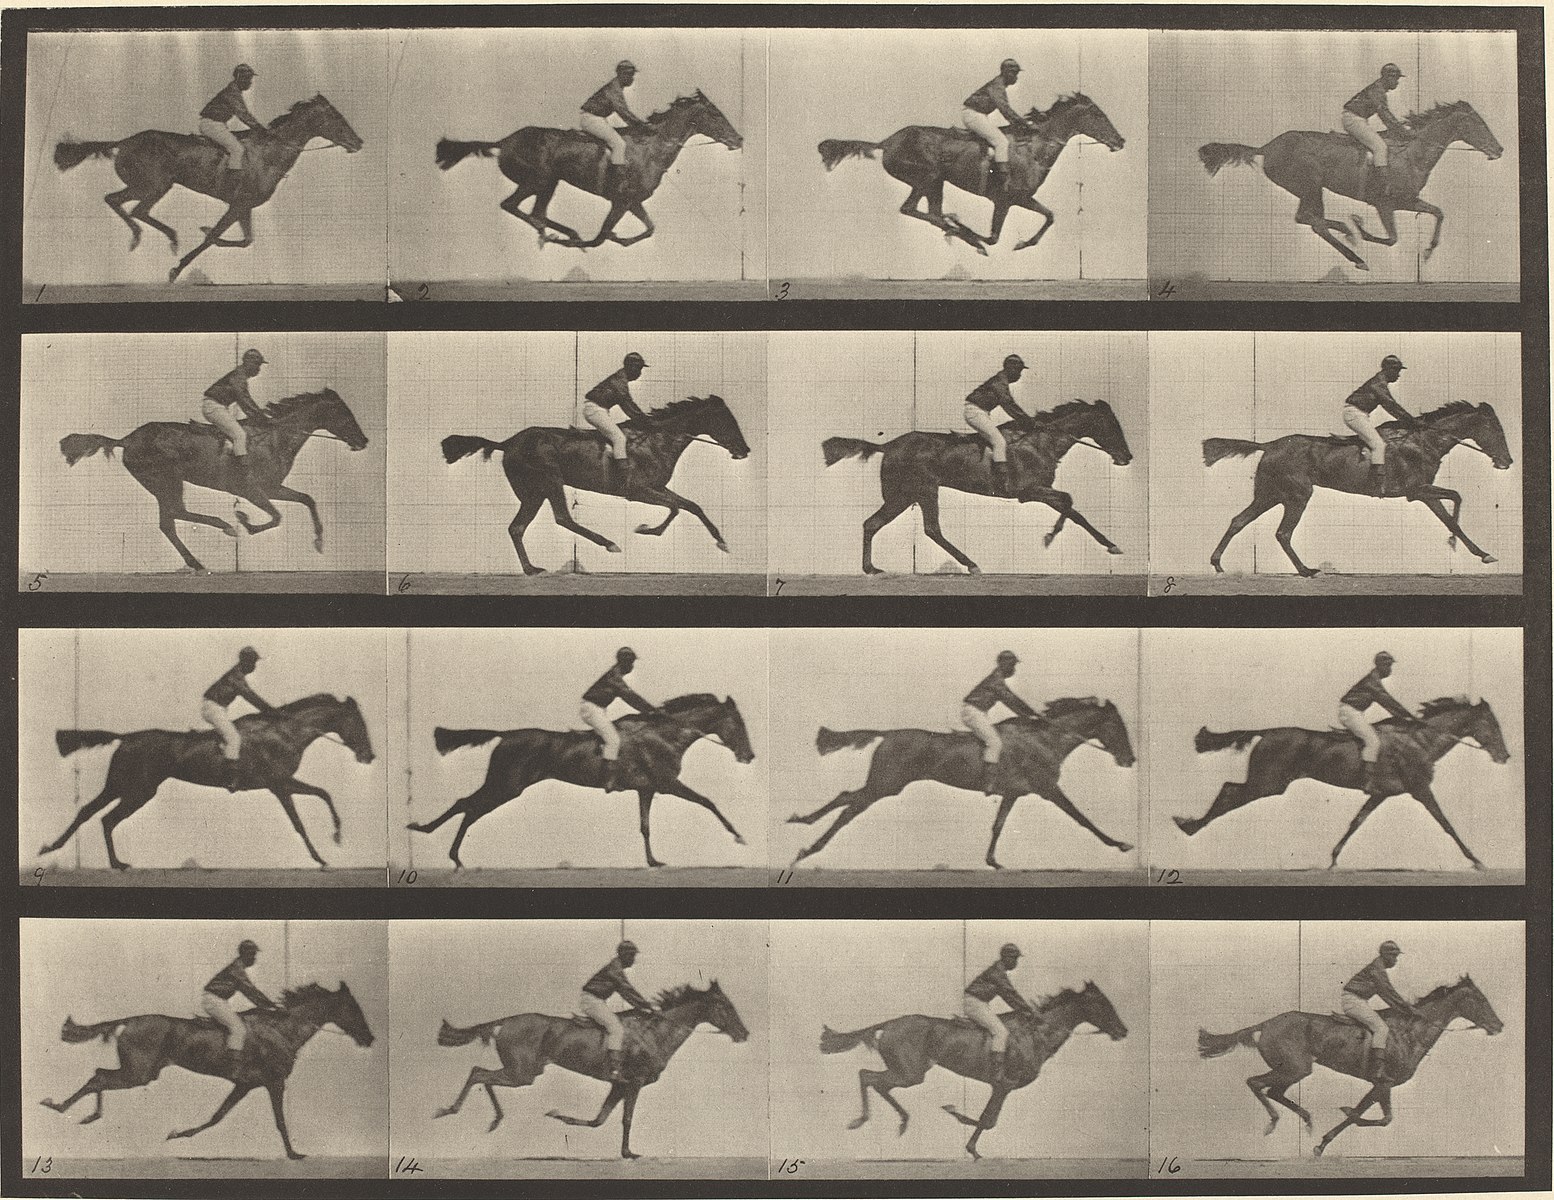 Alt-text: Eadweard Muybridge's stop motion animation of a galloping horse in Animal Locomotion